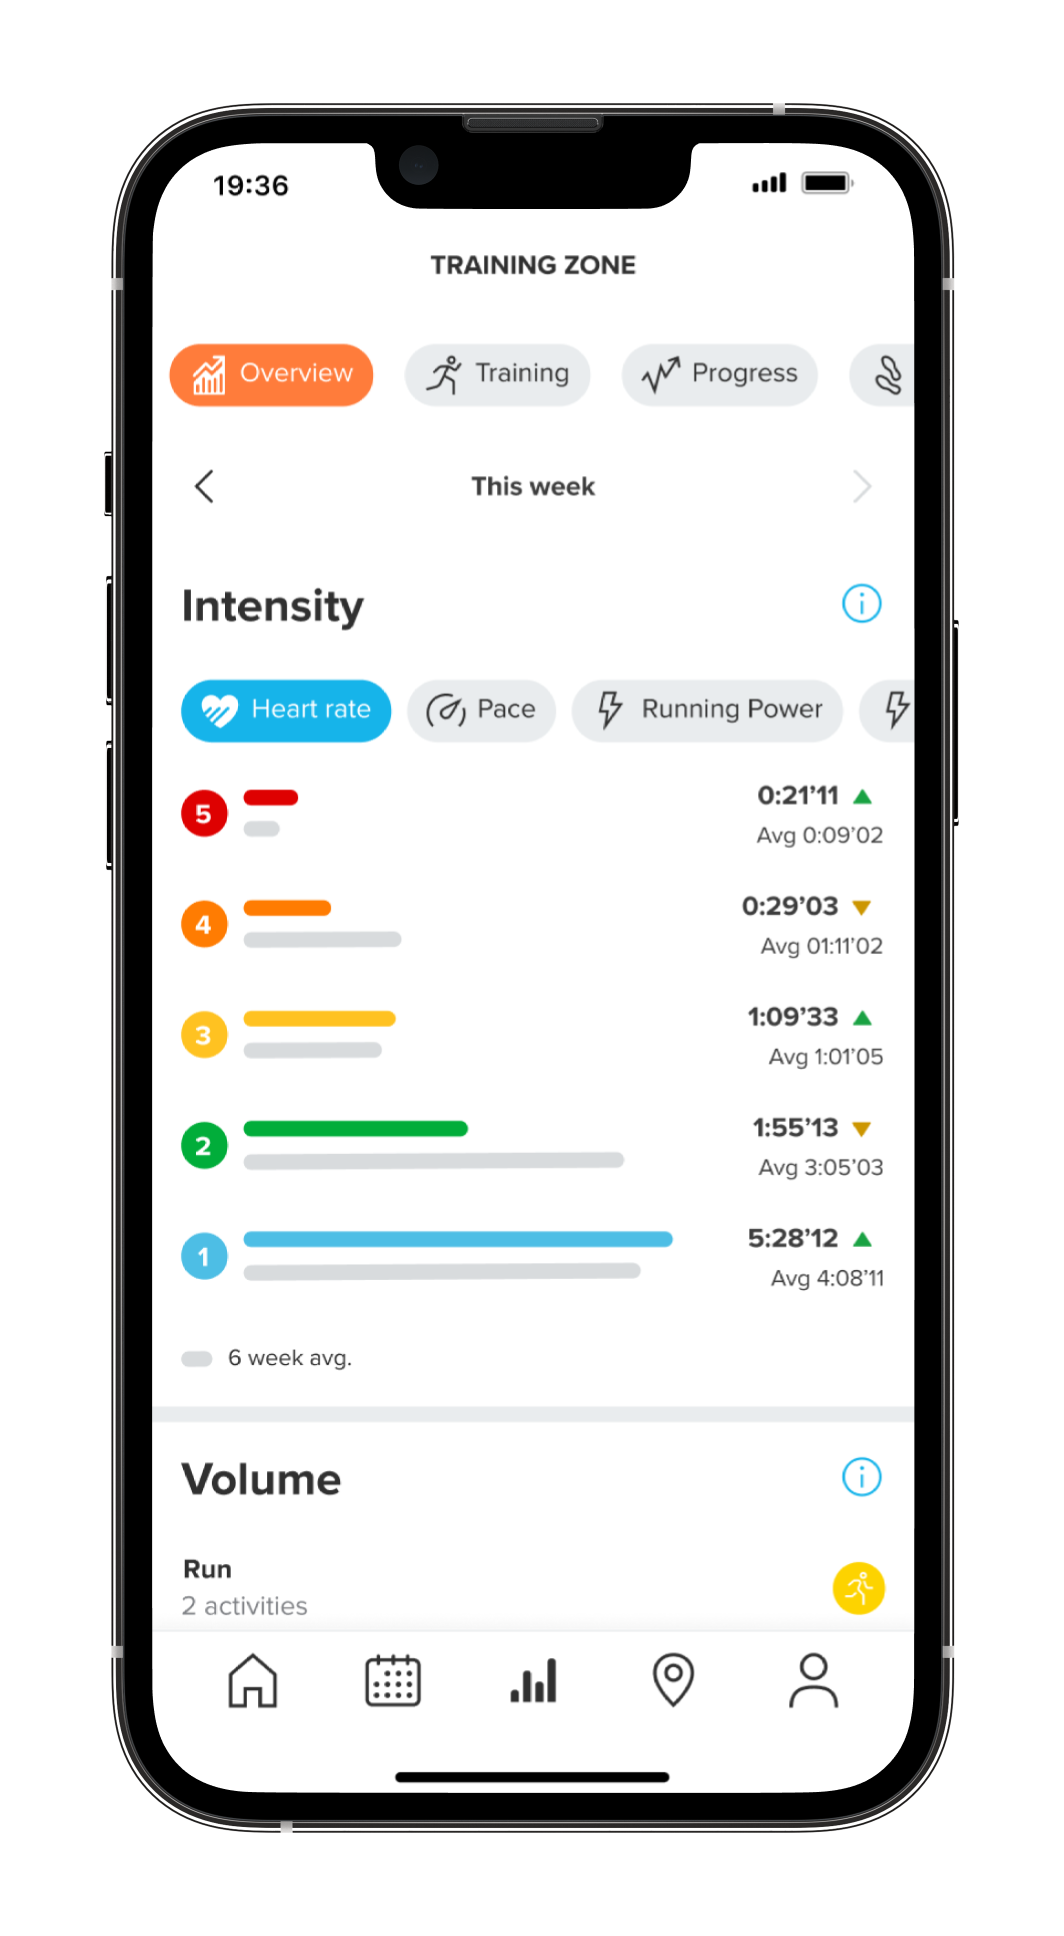 The new Training intensity theme in Suunto app will help you understand your training better as you will see both the weekly intensity distribution and the six-week averages. 